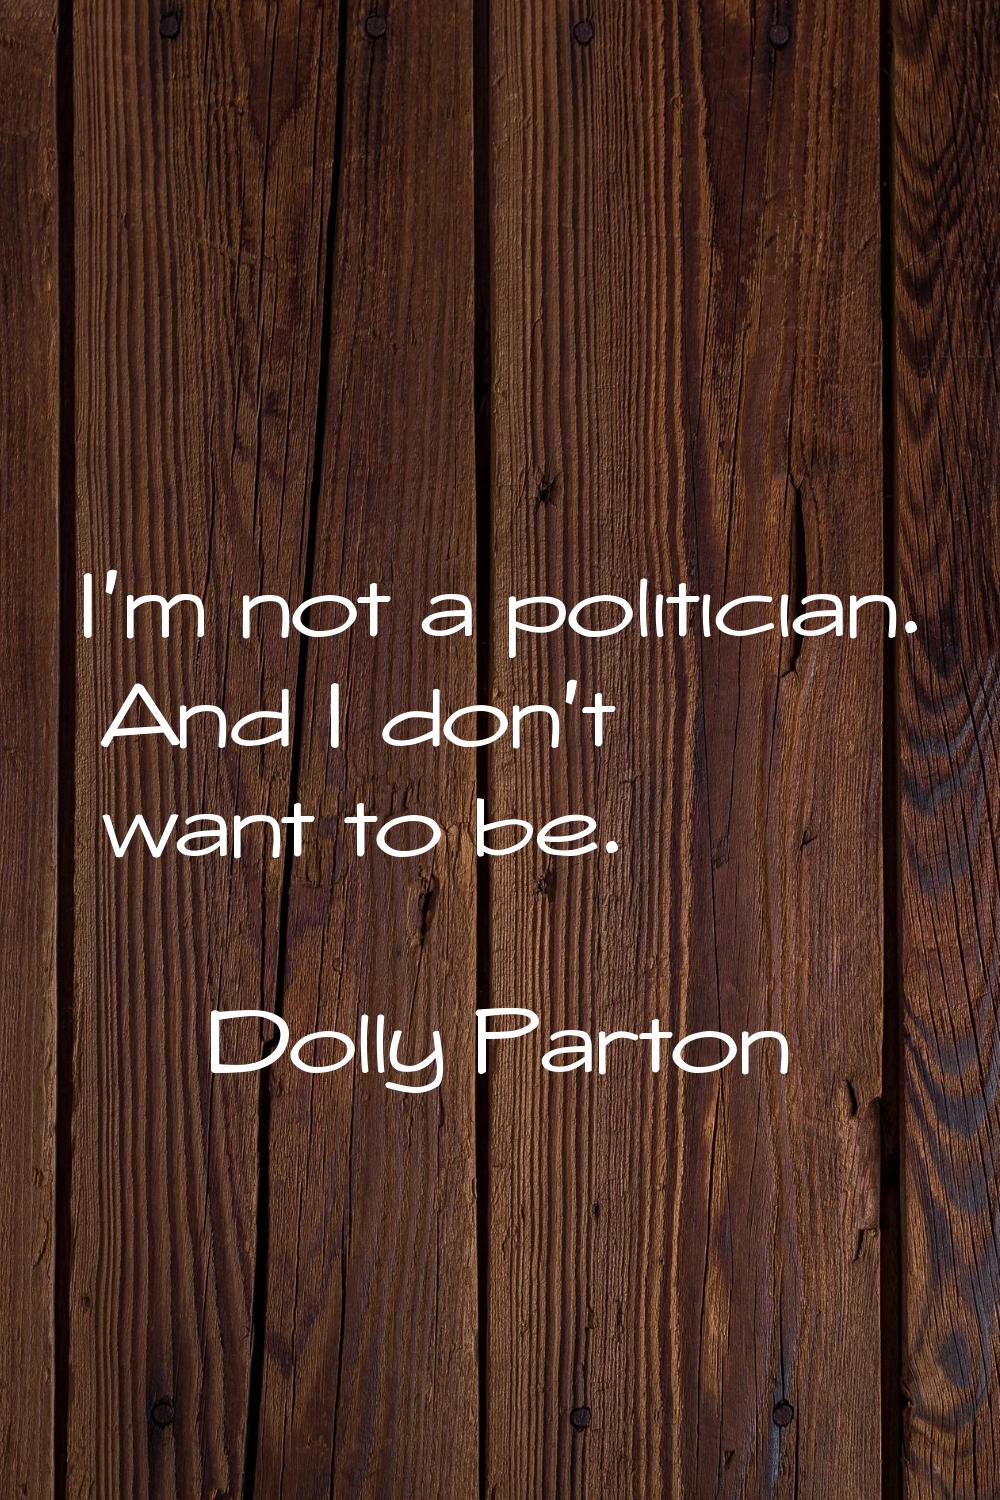 I'm not a politician. And I don't want to be.